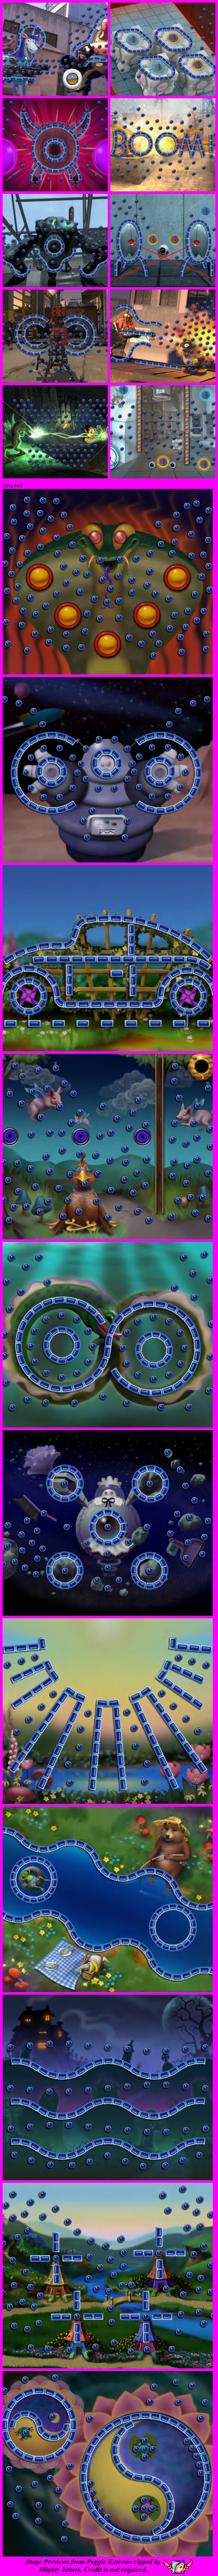 Peggle Extreme - Stage Previews